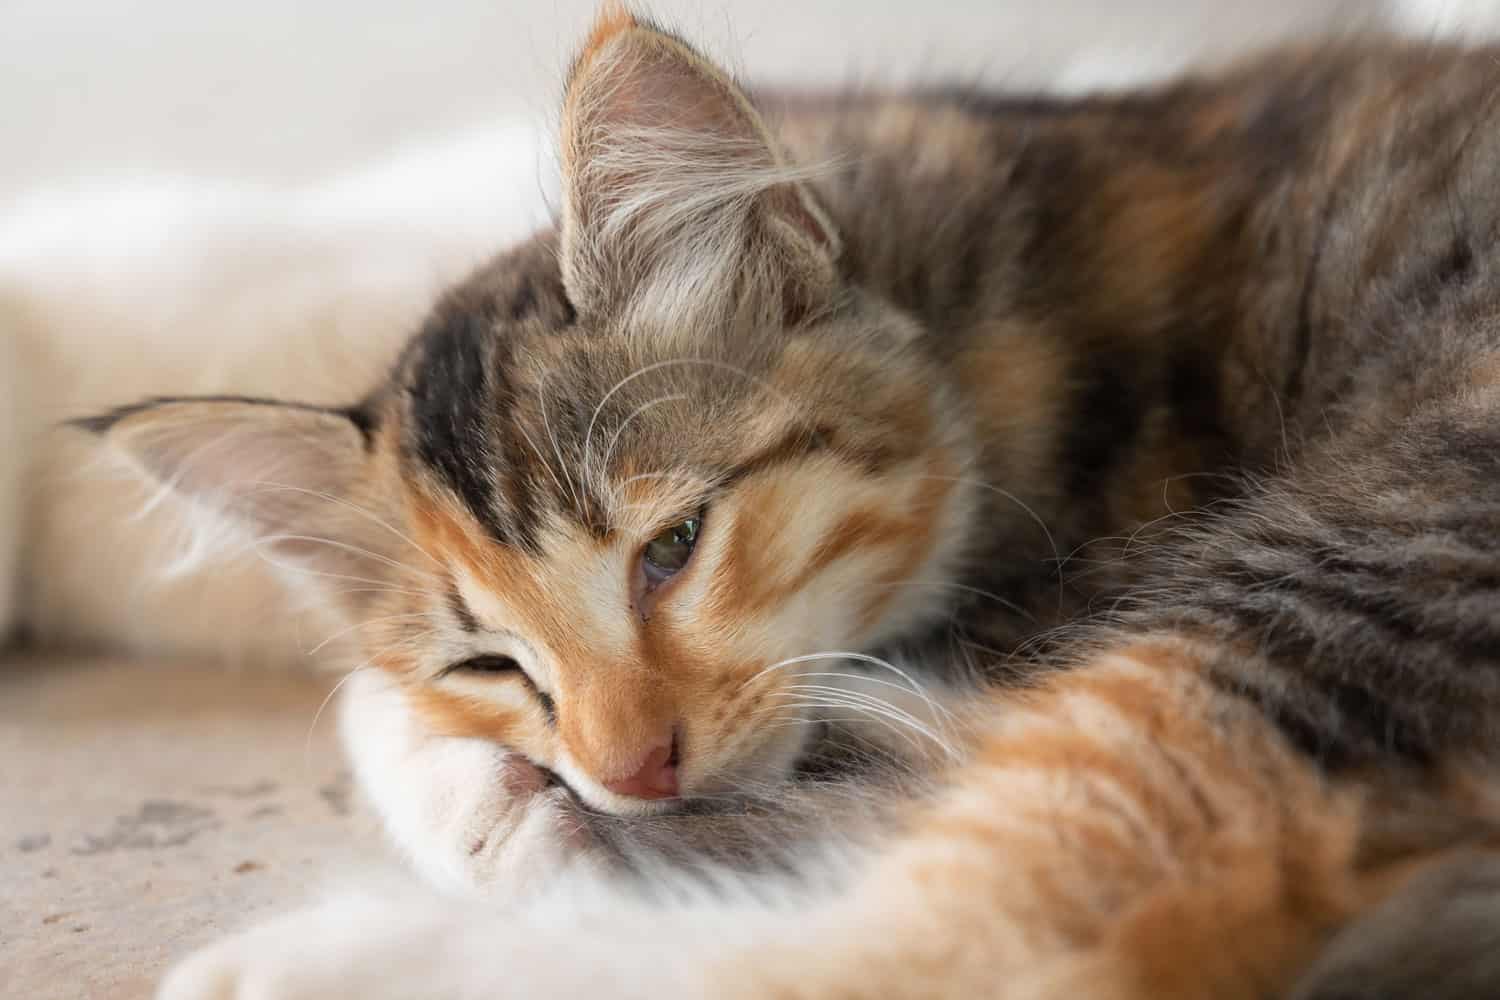 A photograph captures a tricolor kitten reclining on the floor exuding an air of feline melancholy. The cat's demeanor suggests feelings of sadness boredom and perhaps even sickness.